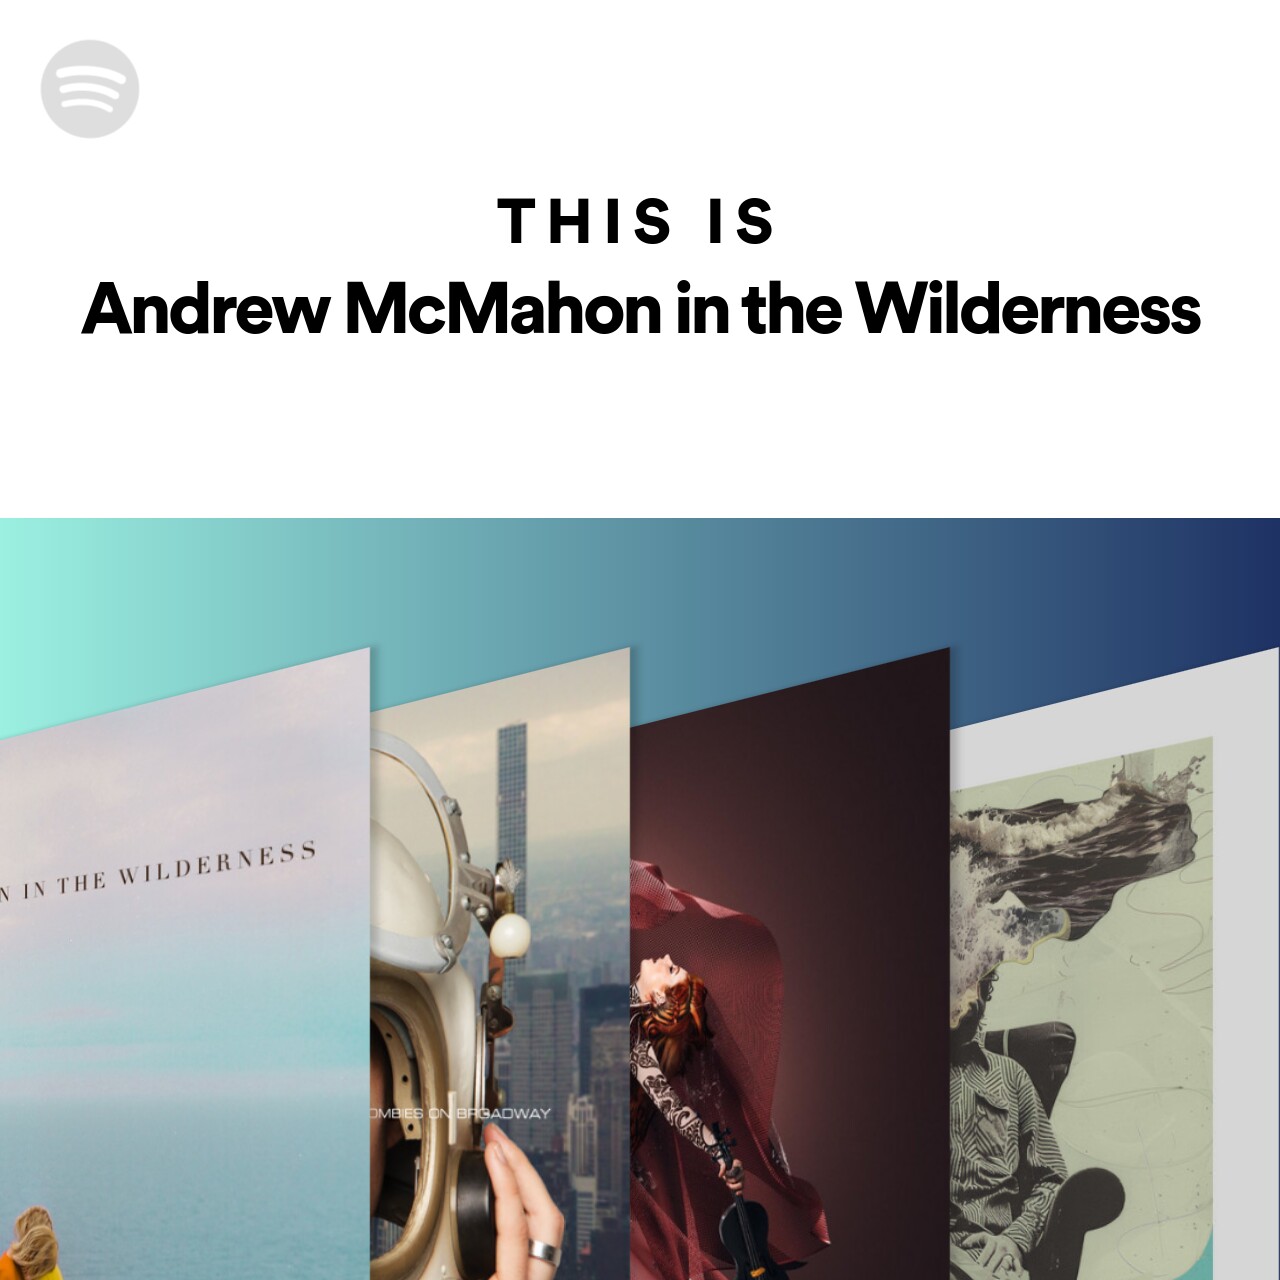 This Is Andrew McMahon in the Wilderness